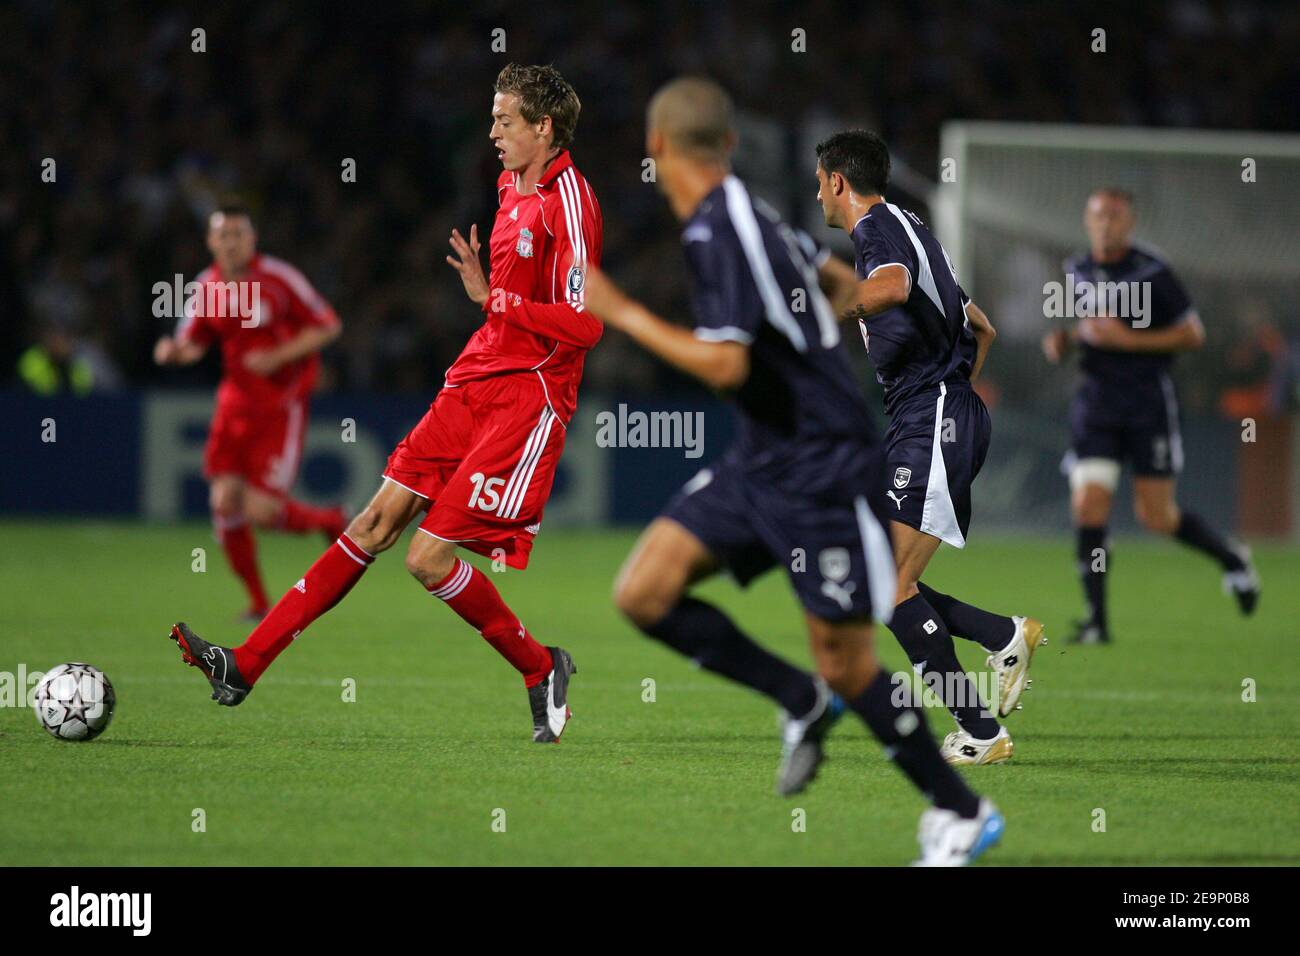 Liverpool's Peter Crouch during the Champions League group C match, FC Girondins De Bordeaux vs Liverpool FC, at Chaban-Delmas Stadium in Bordeaux, France, on October 18, 2006. Liverpool won 1-0. Photo by Manuel Blondeau/Cameleon/ABACAPRESS.COM Stock Photo